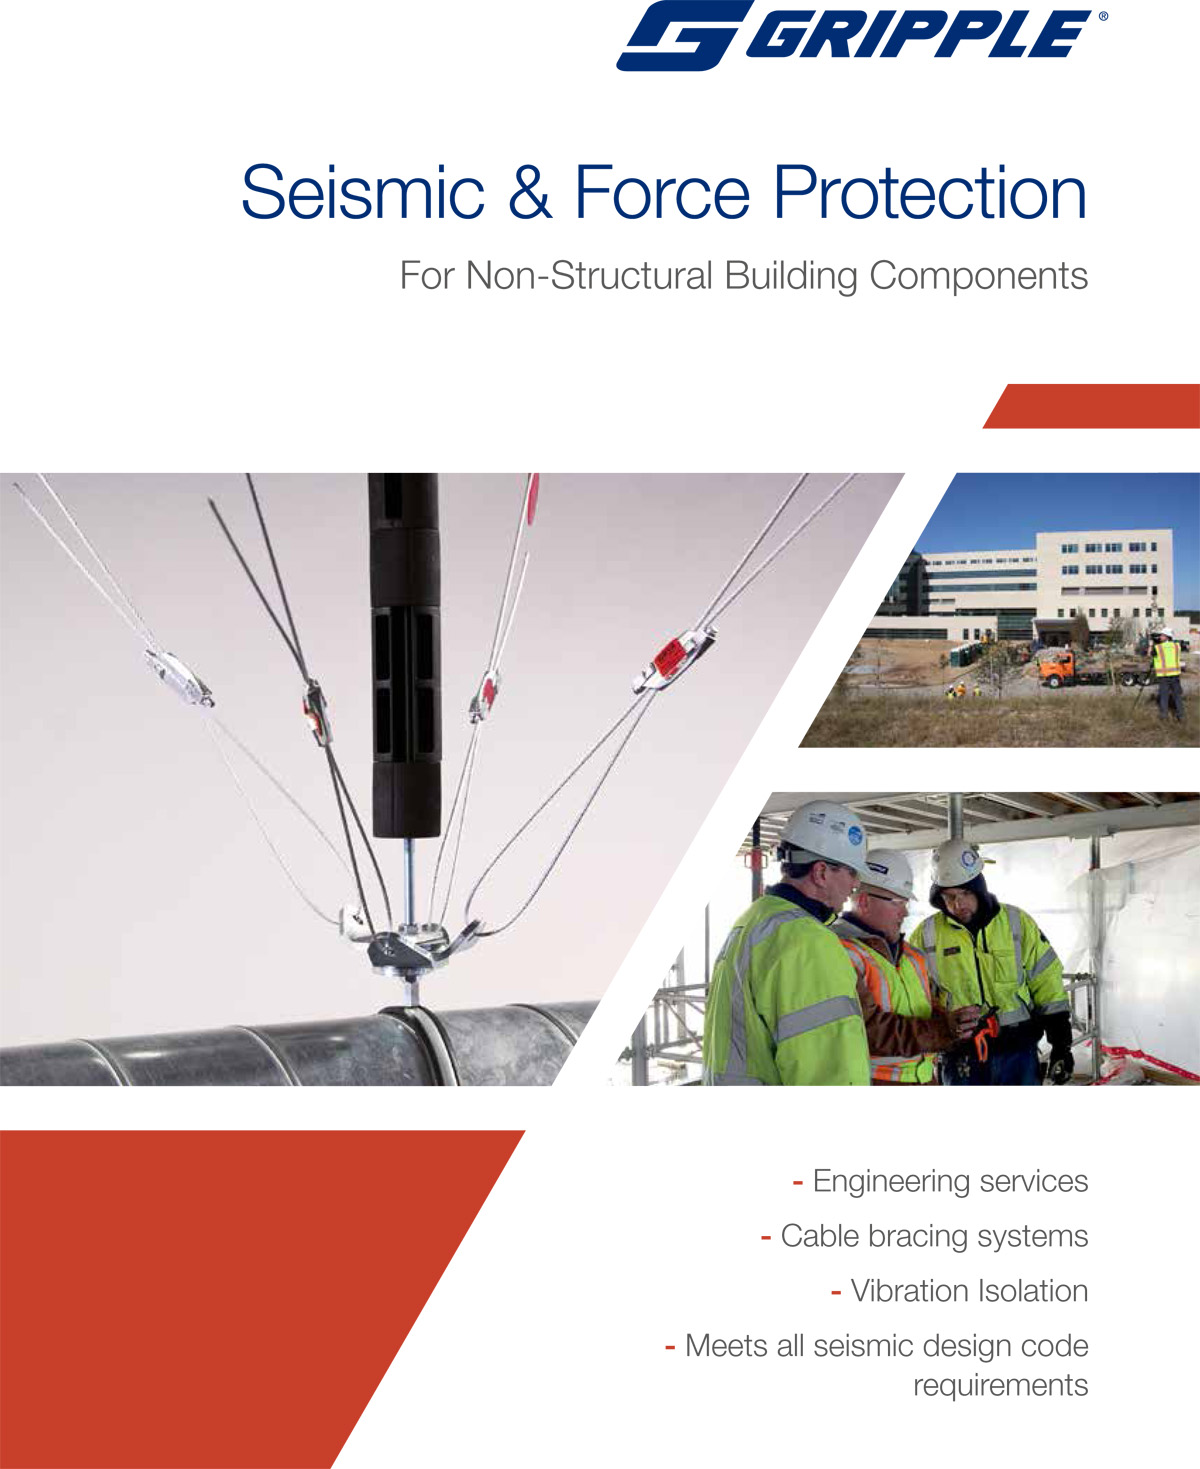 Gripple-Seismic-and-force-protection-1.jpg